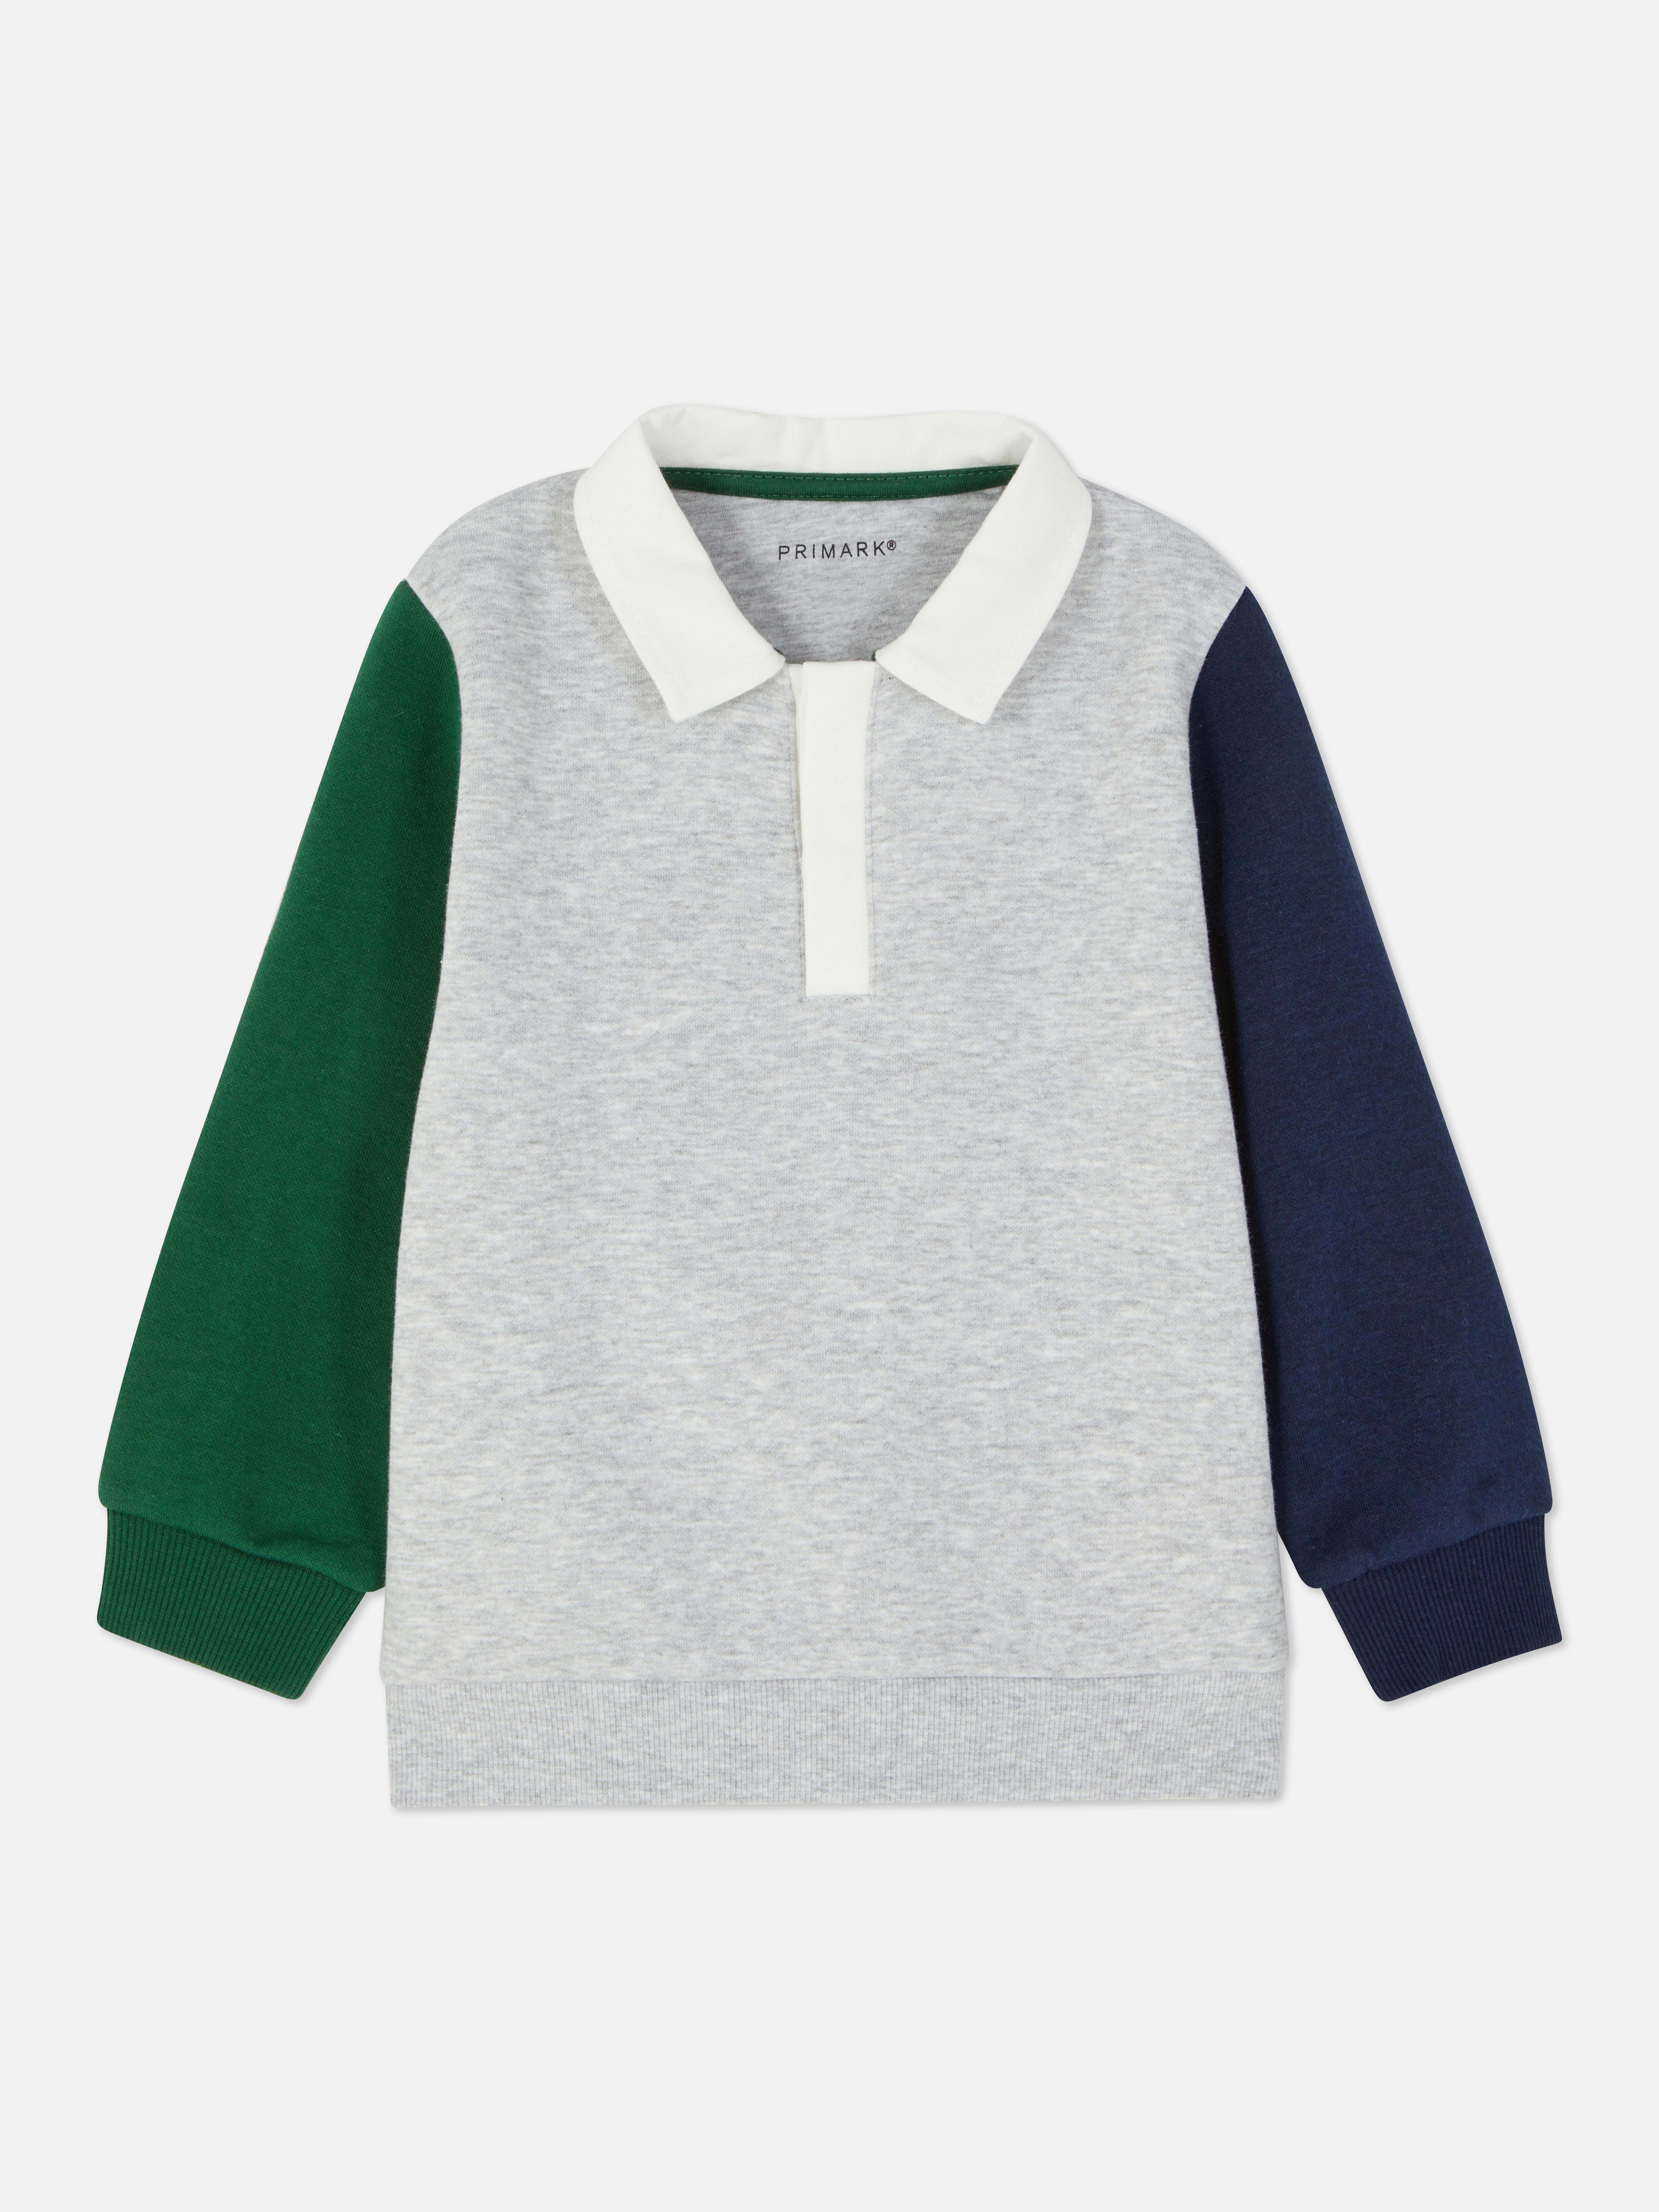 Colour Block Rugby Shirt